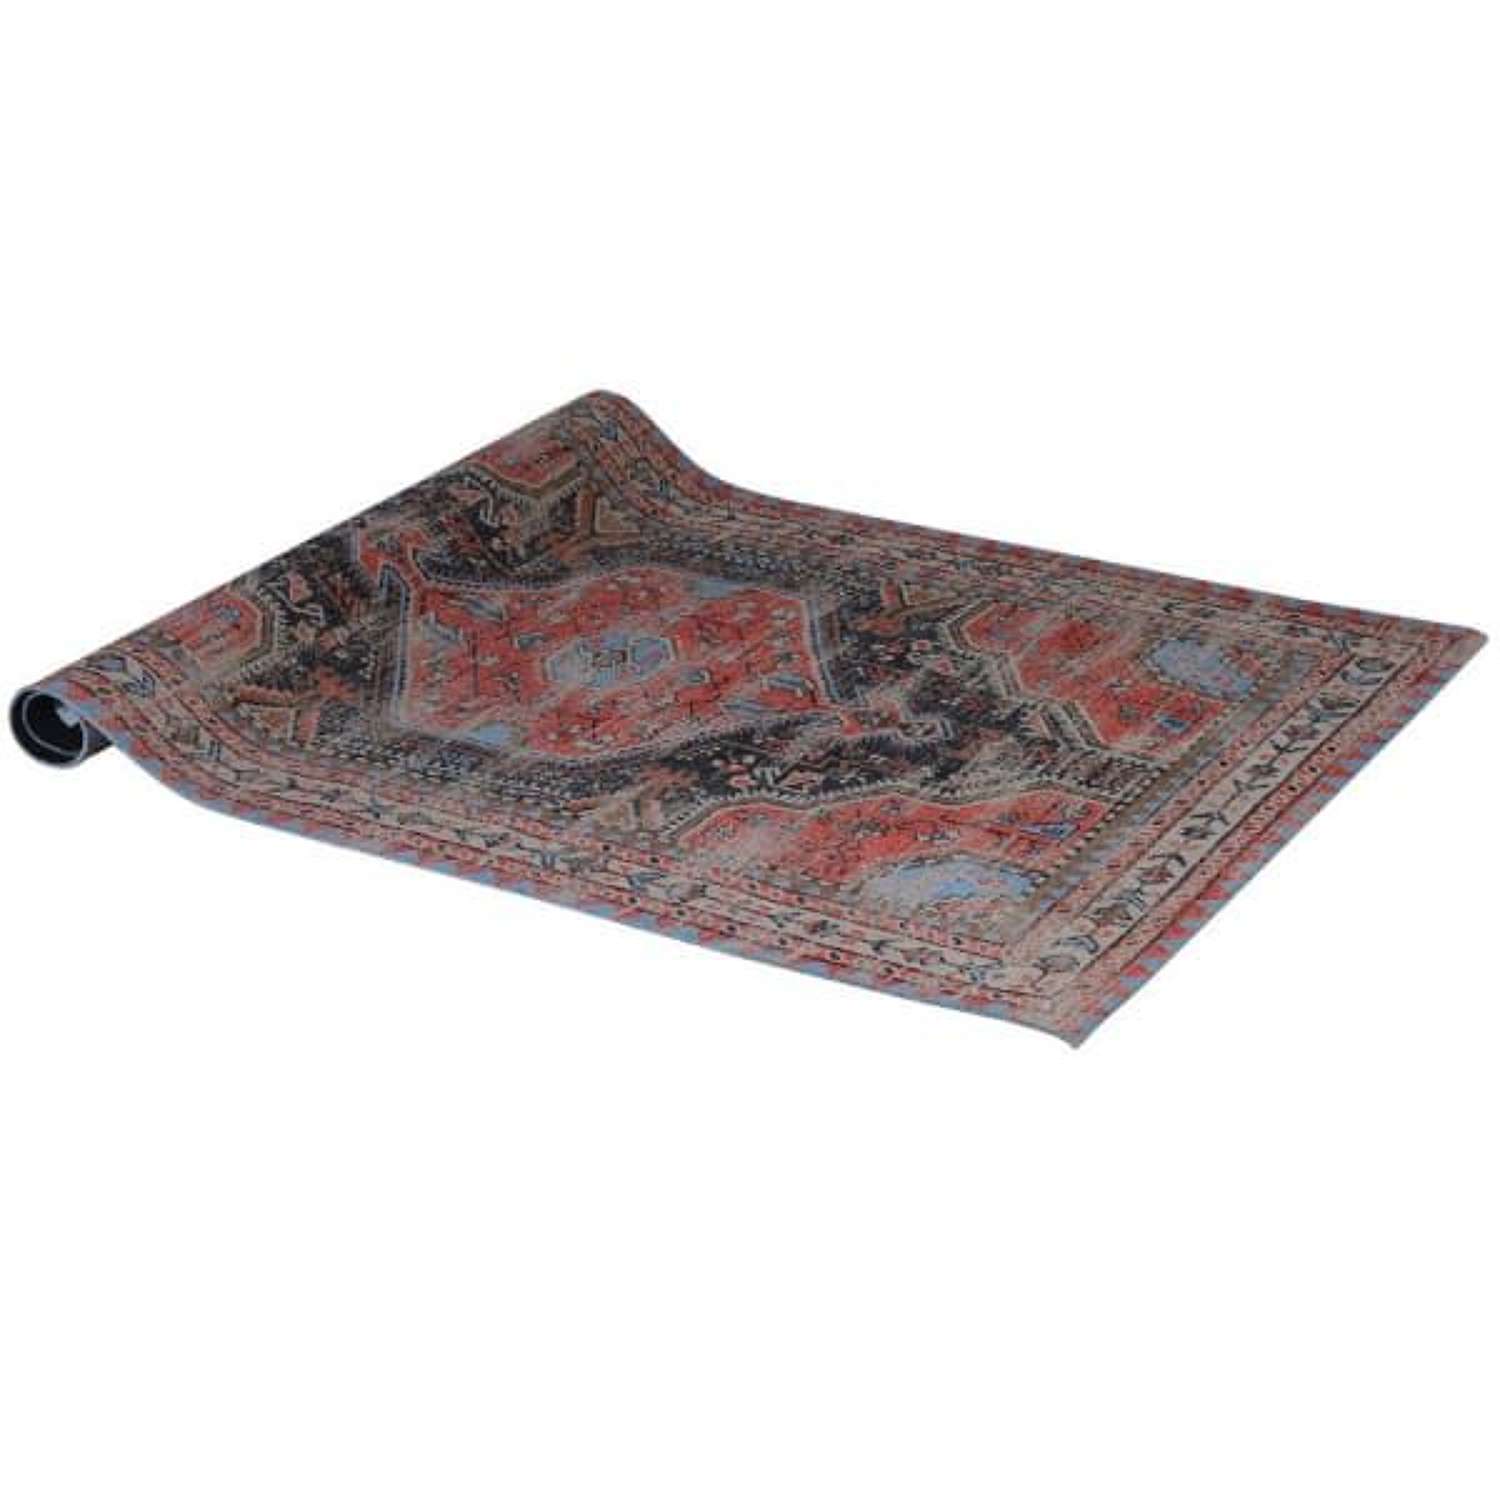 Petra Fire Large Red Rug. Ref NVK004